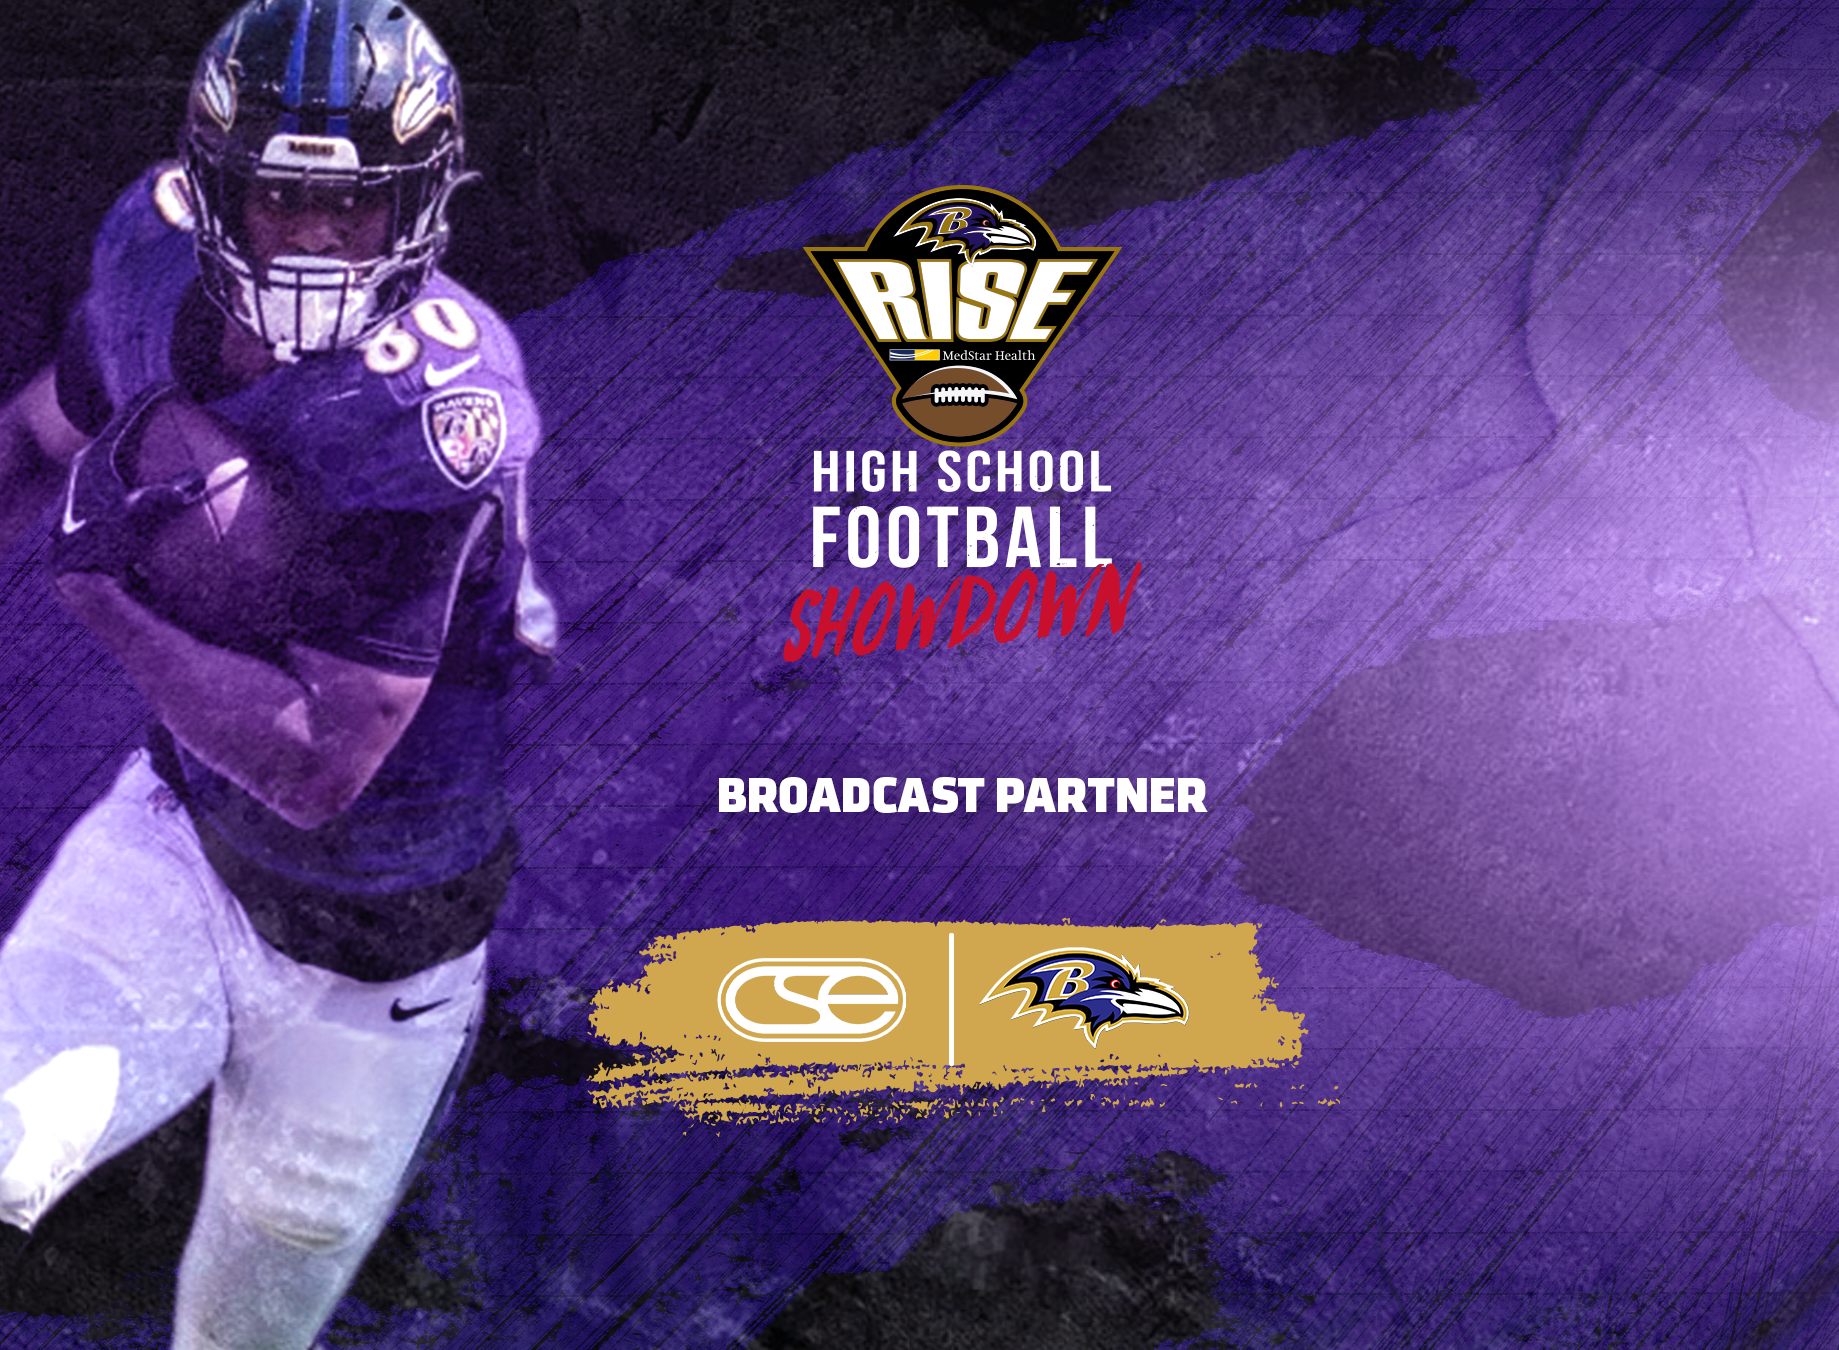 CORRIGAN SPORTS PRODUCTIONS TO COVER 2022 RAVENS RISE